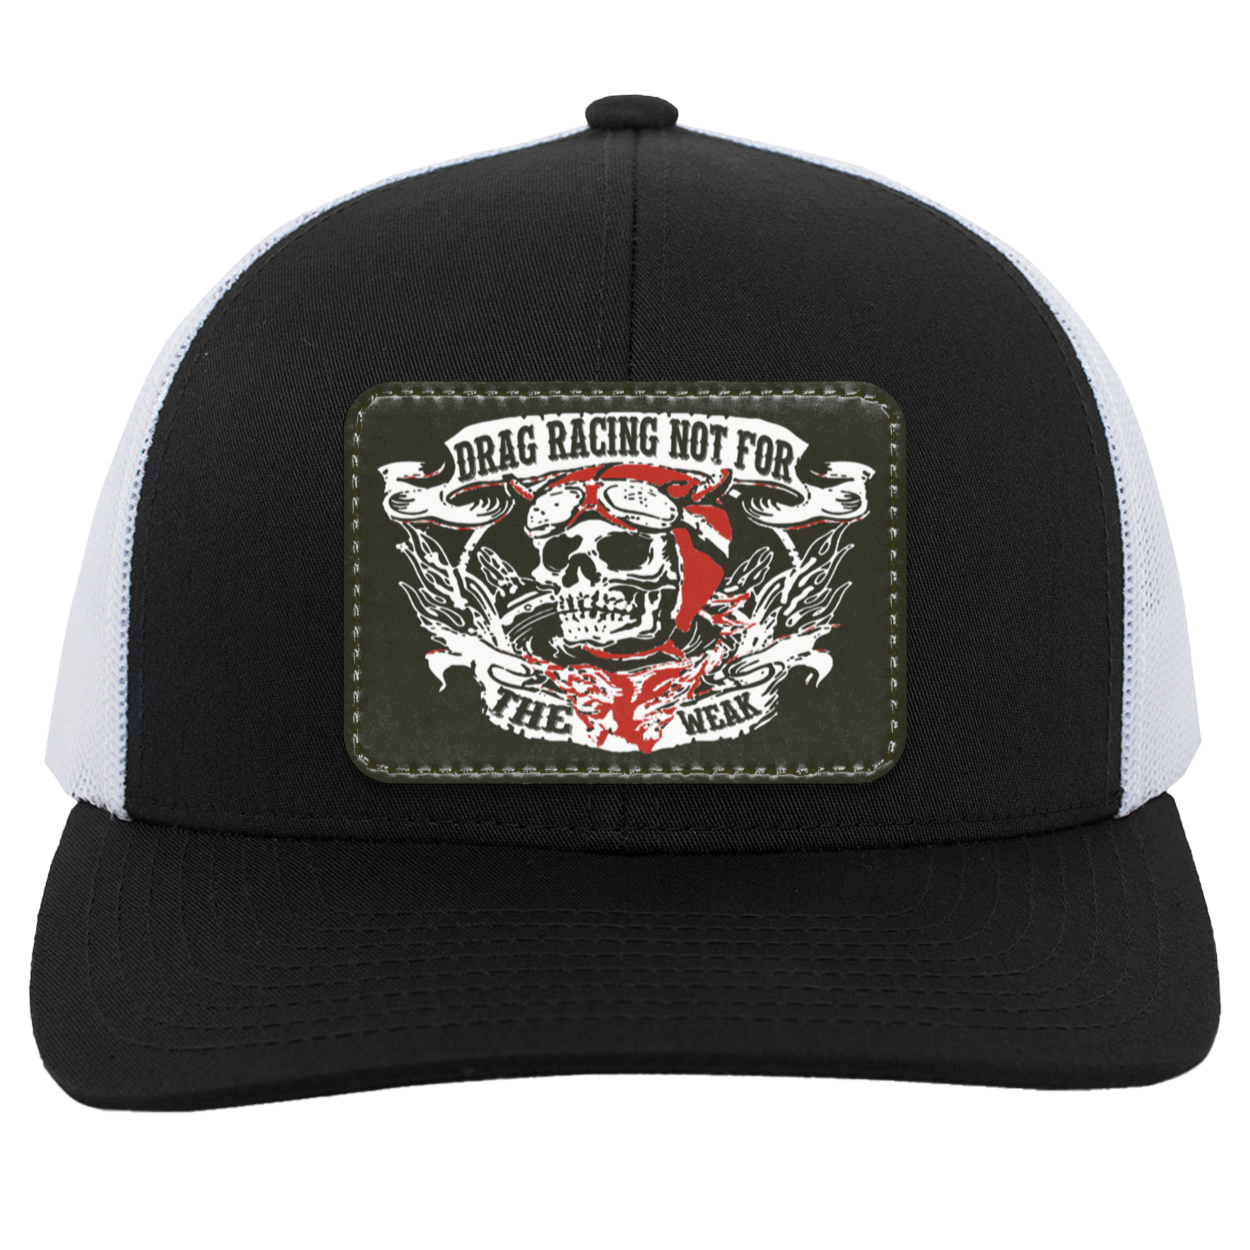 Drag Racing Not For The Weak Trucker Patched Snap Back